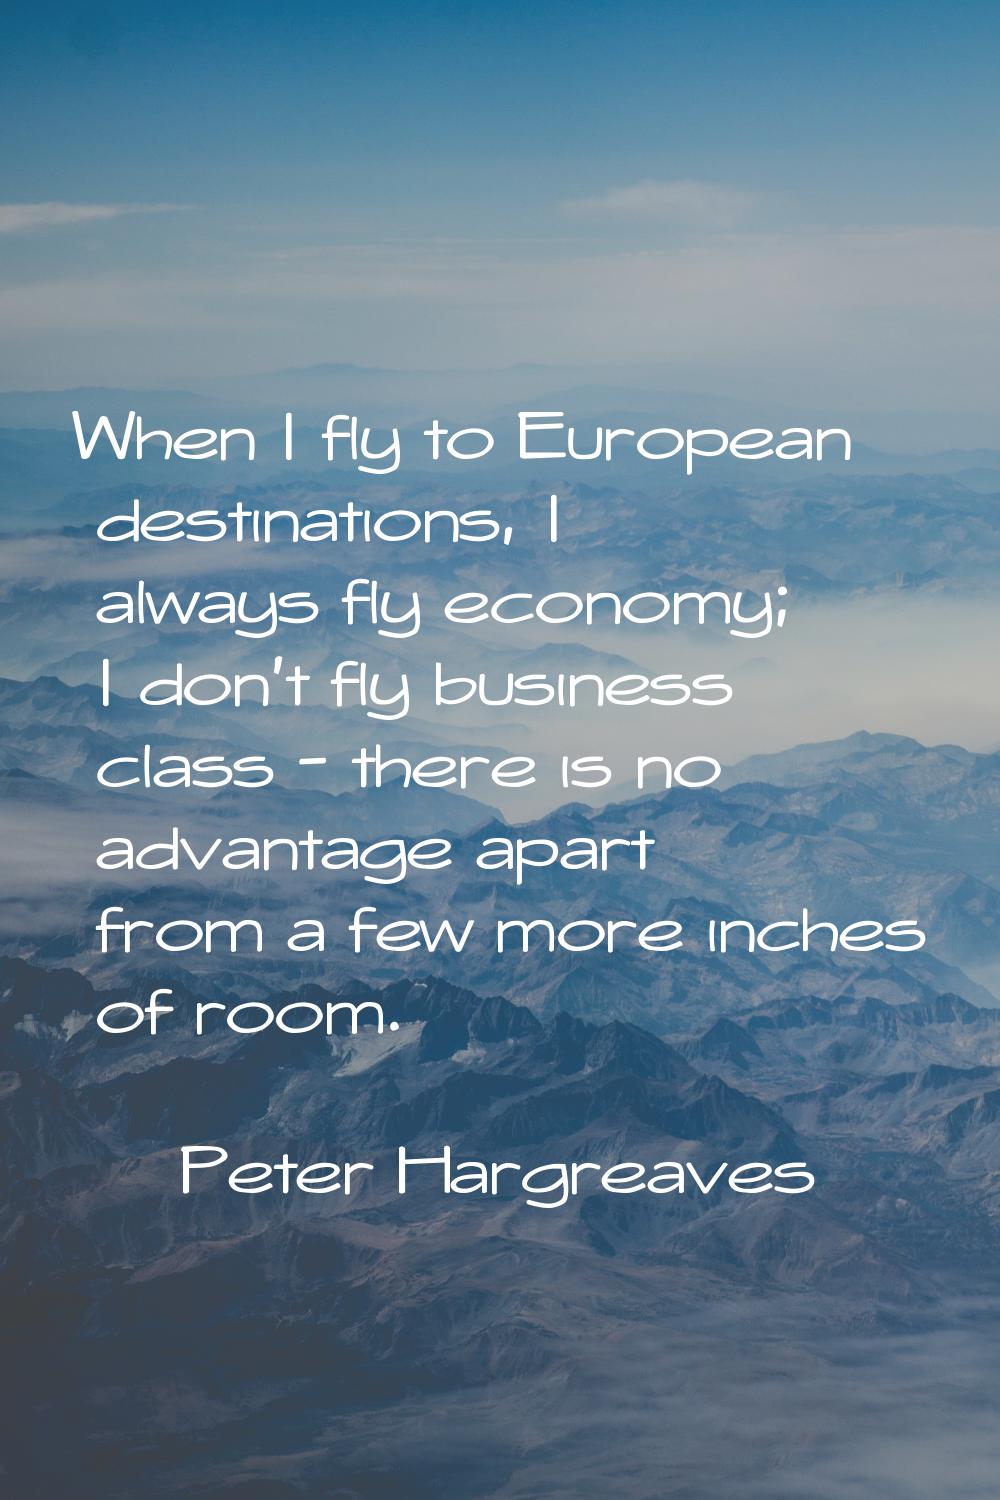 When I fly to European destinations, I always fly economy; I don't fly business class - there is no